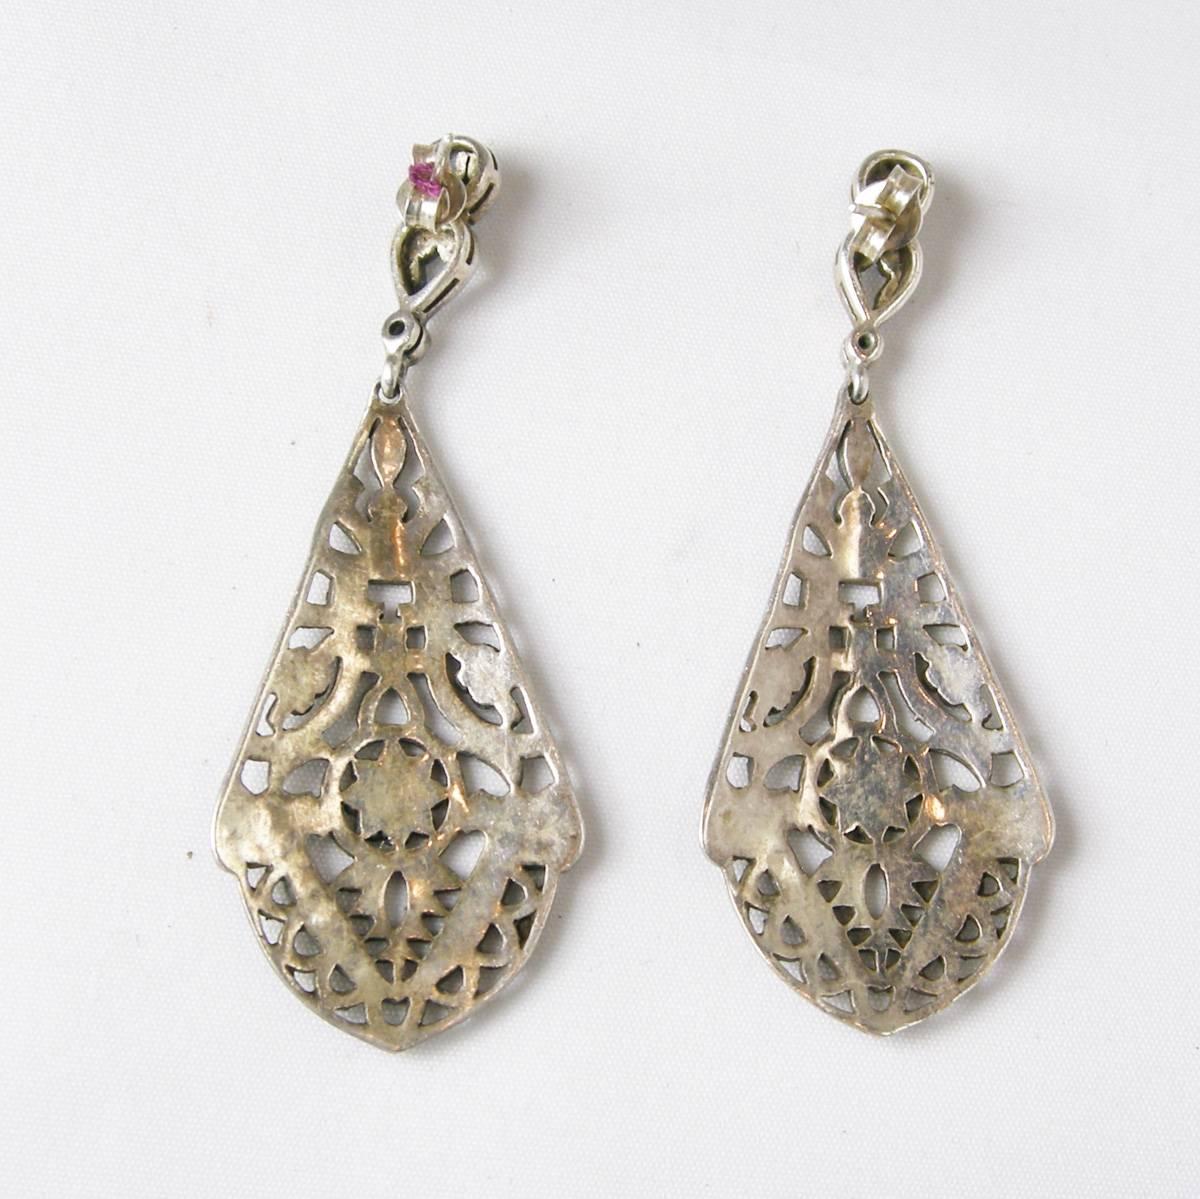 These stunning Art Deco earrings feature marcasites in a sterling silver setting.  These pierced earrings measure 2-1/4” x 3/4” and are in excellent condition.
